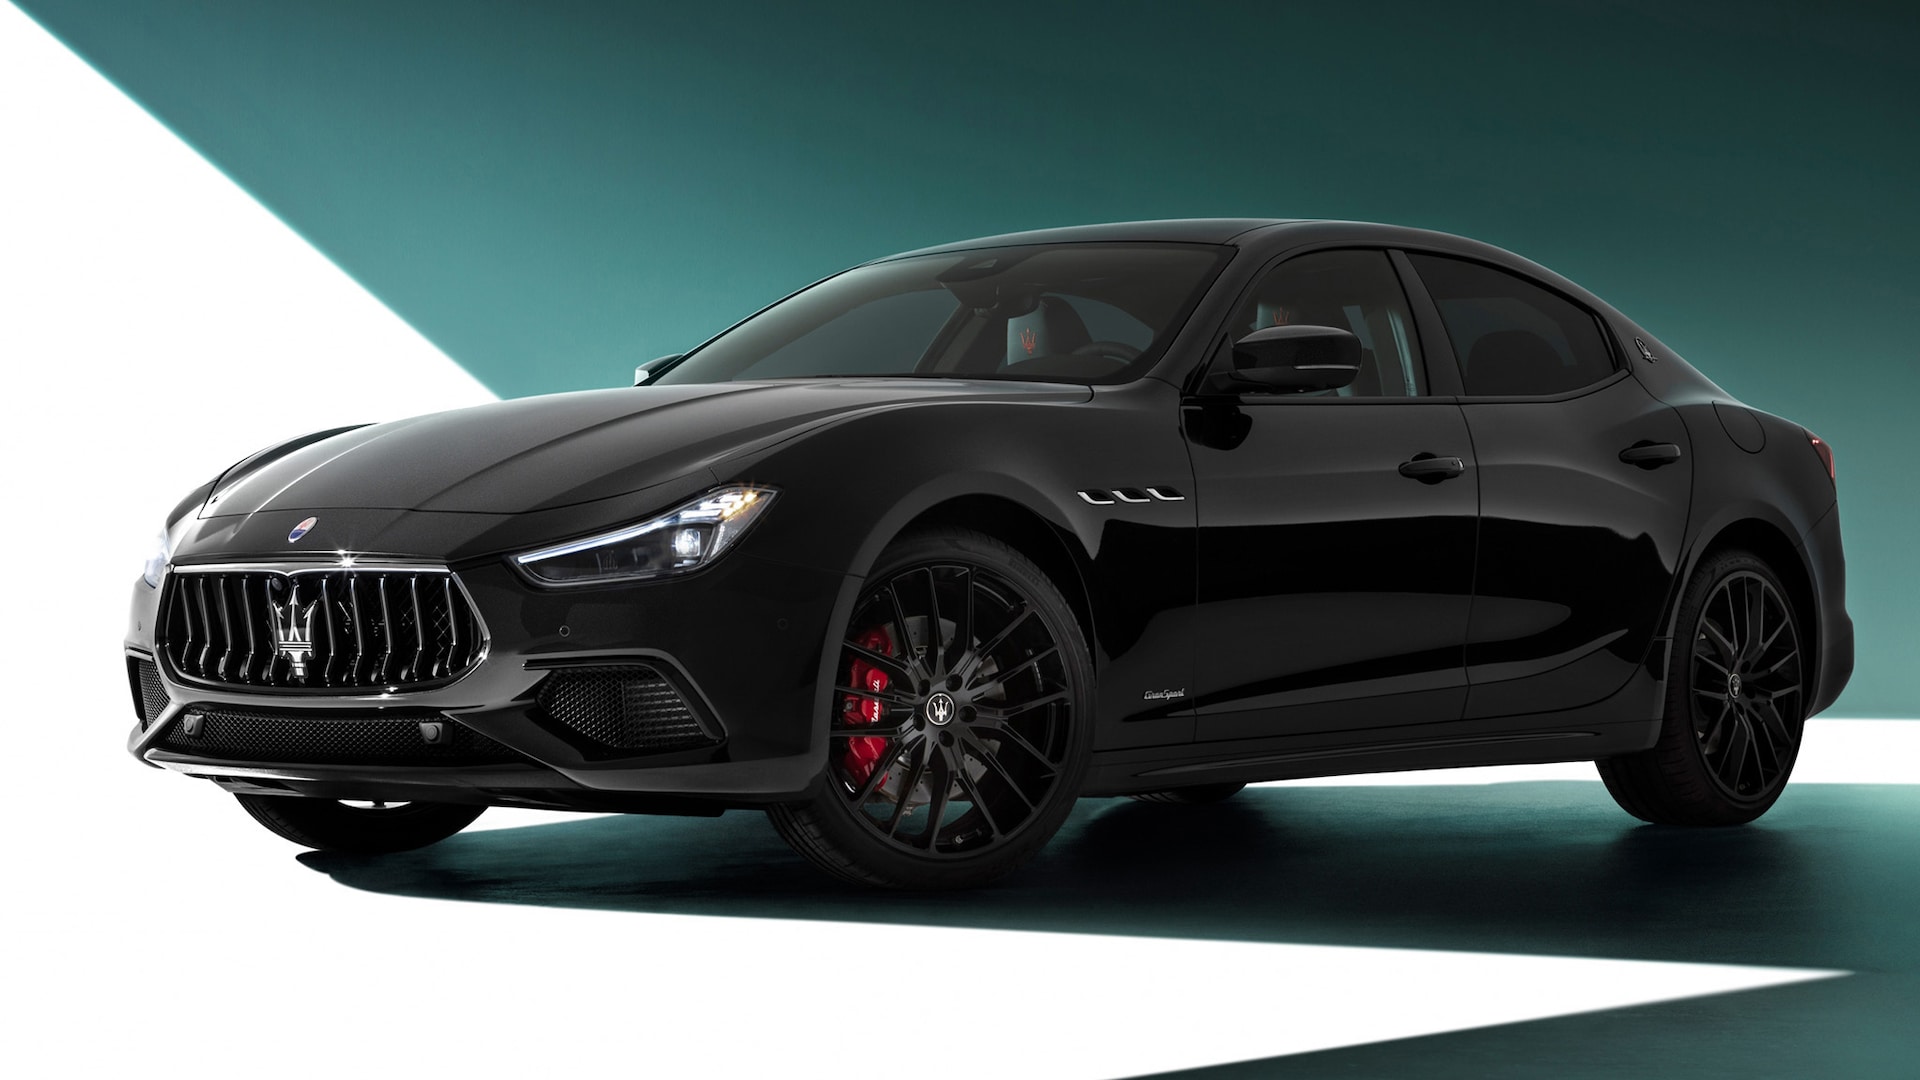 2022 Maserati Ghibli Prices, Reviews, and Photos - MotorTrend